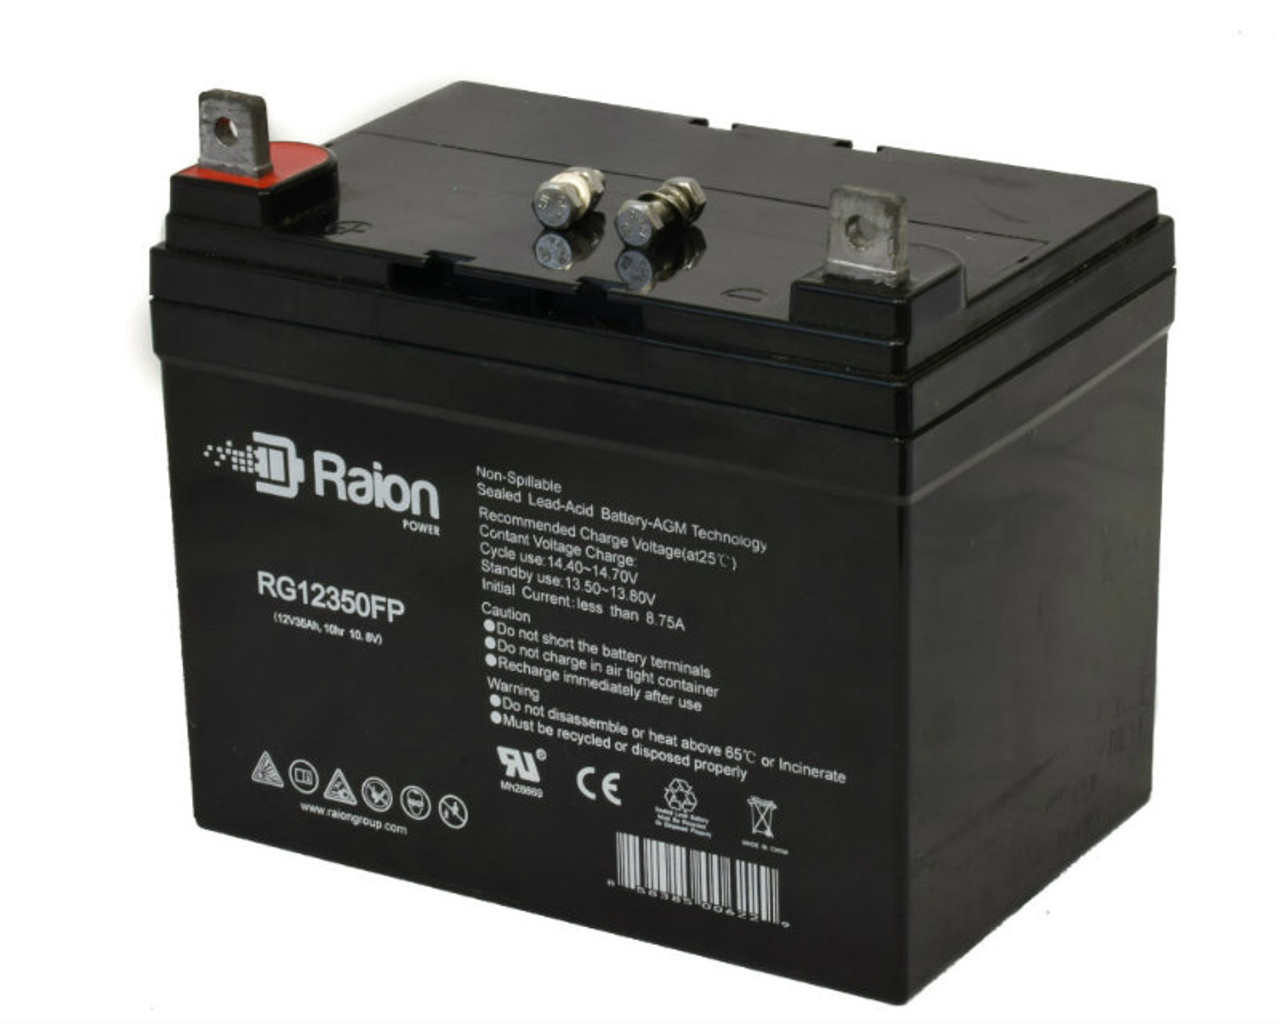 Raion Power Replacement 12V 35Ah RG12350FP Mobility Scooter Battery for Merits Health Products Pioneer S143